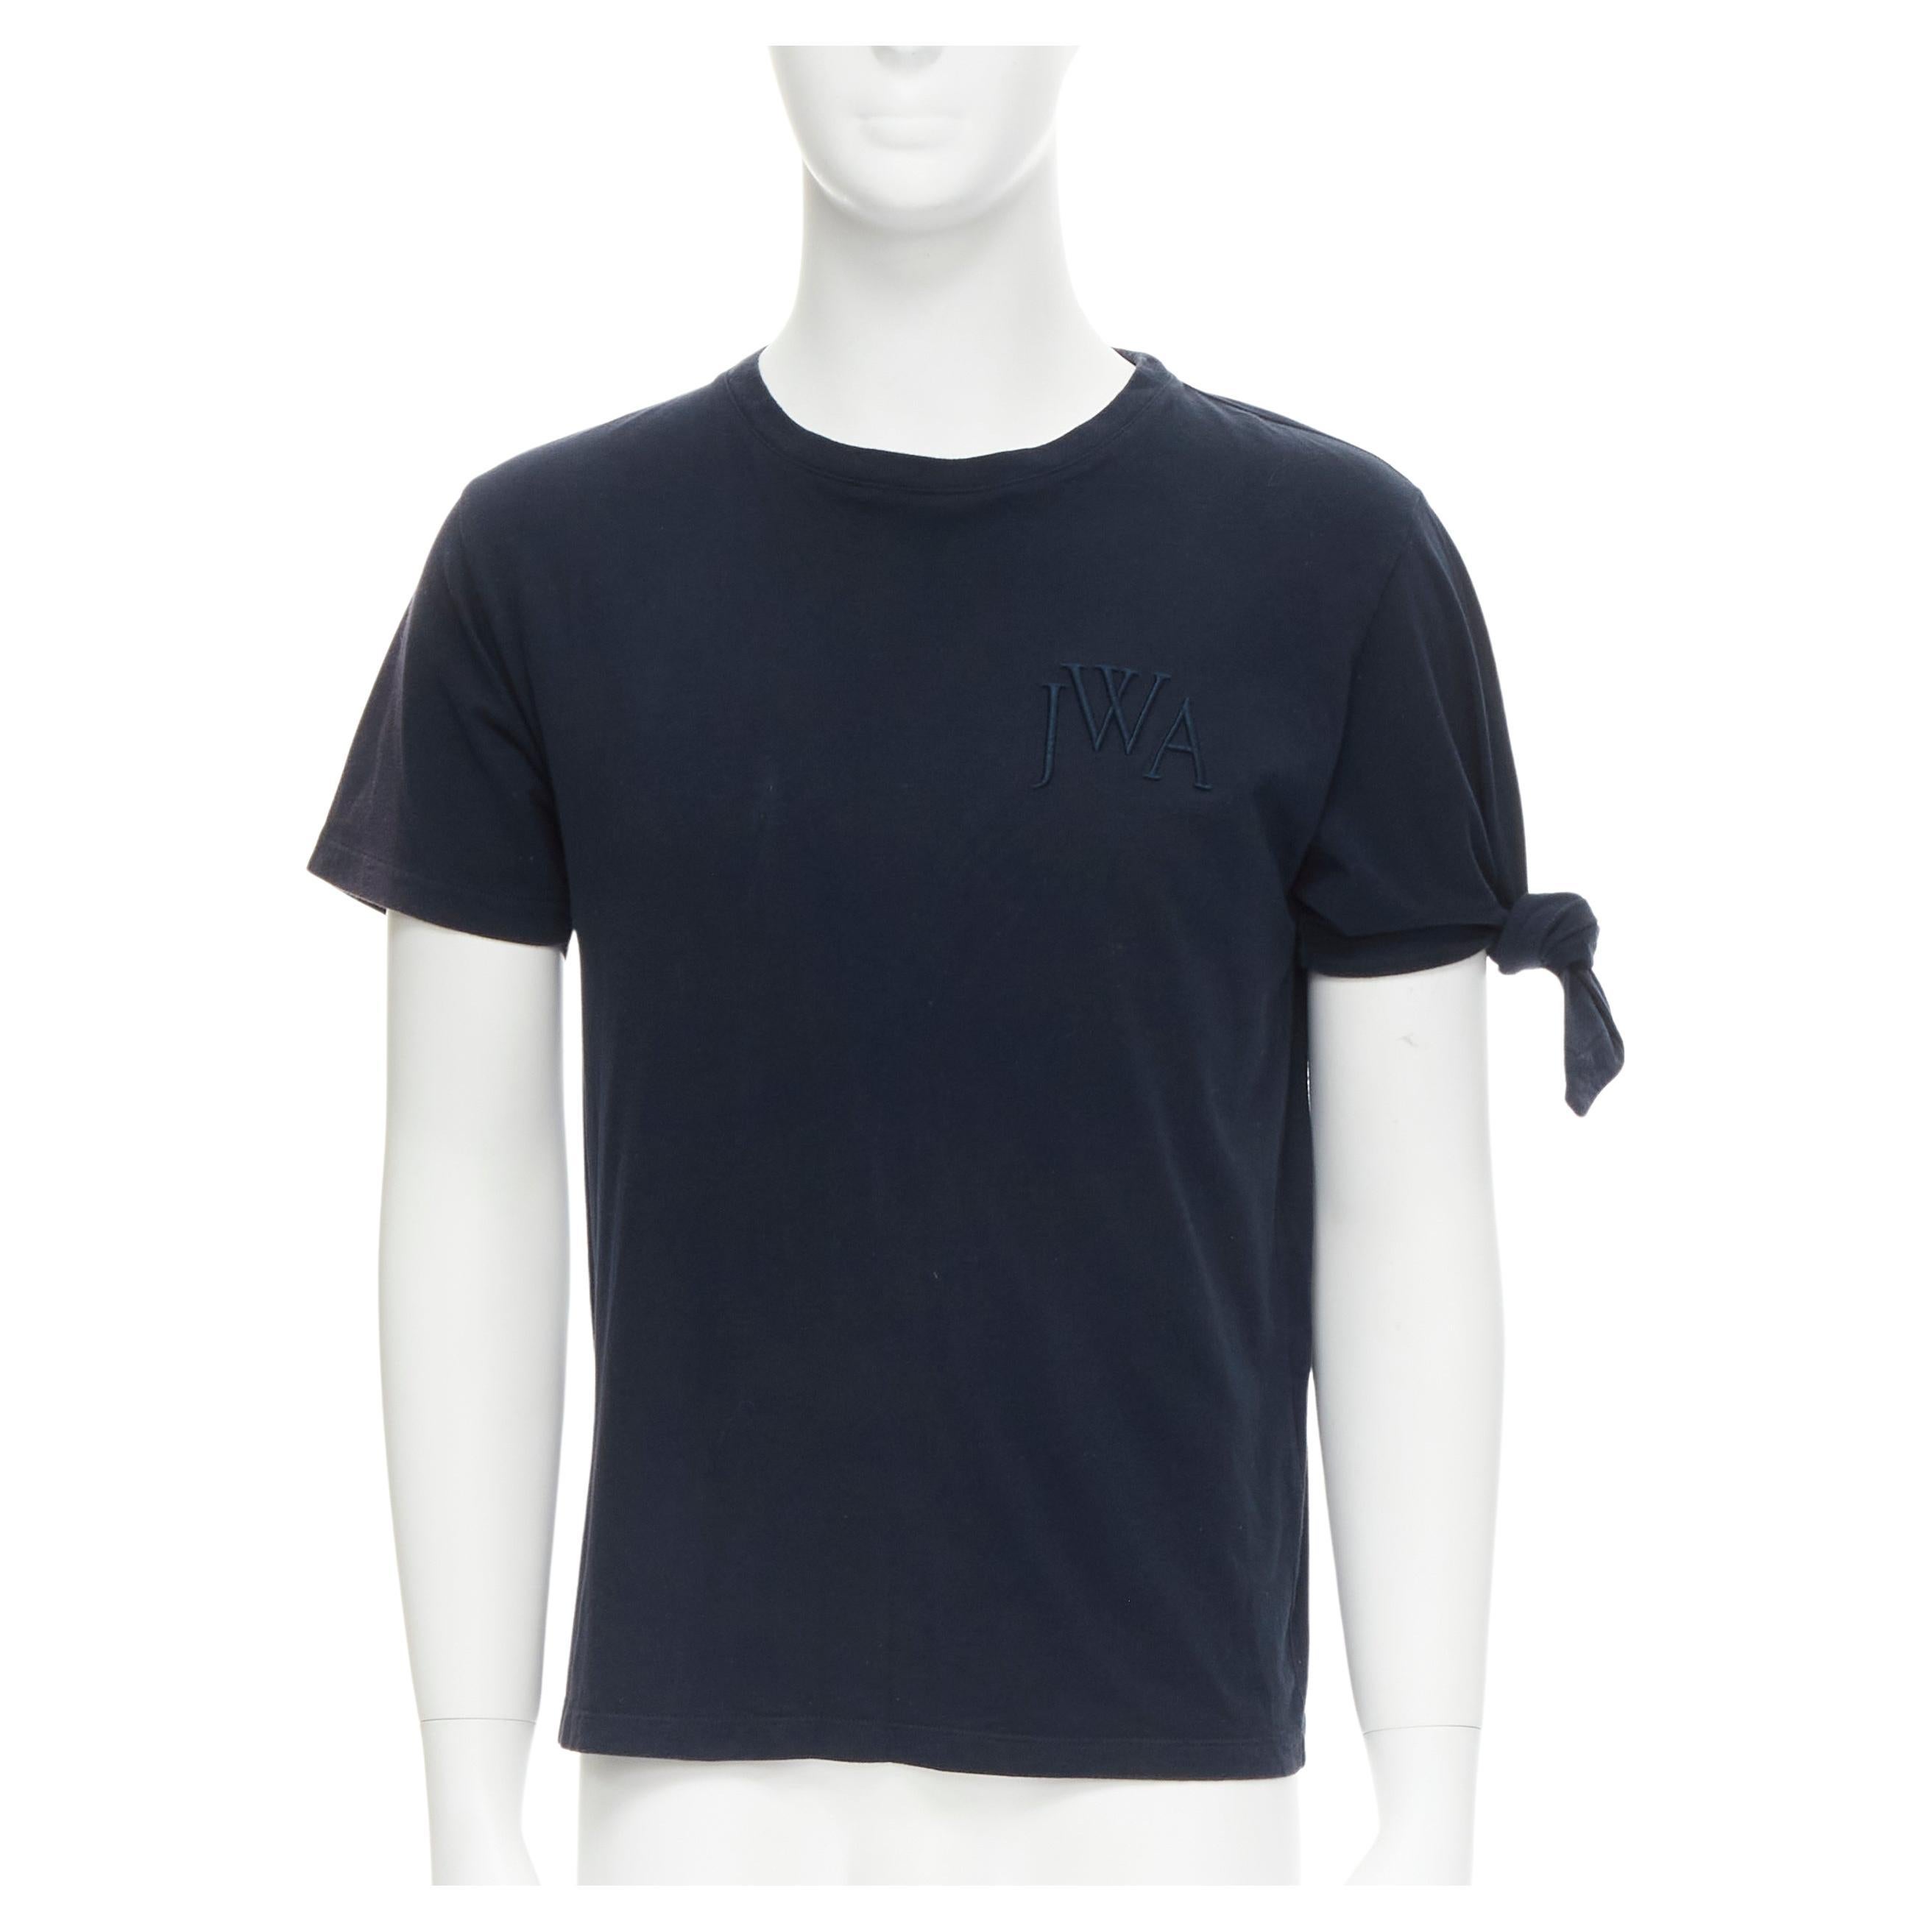 JW Anderson JWA logo embroidered navy blue cotton tie sleeve T